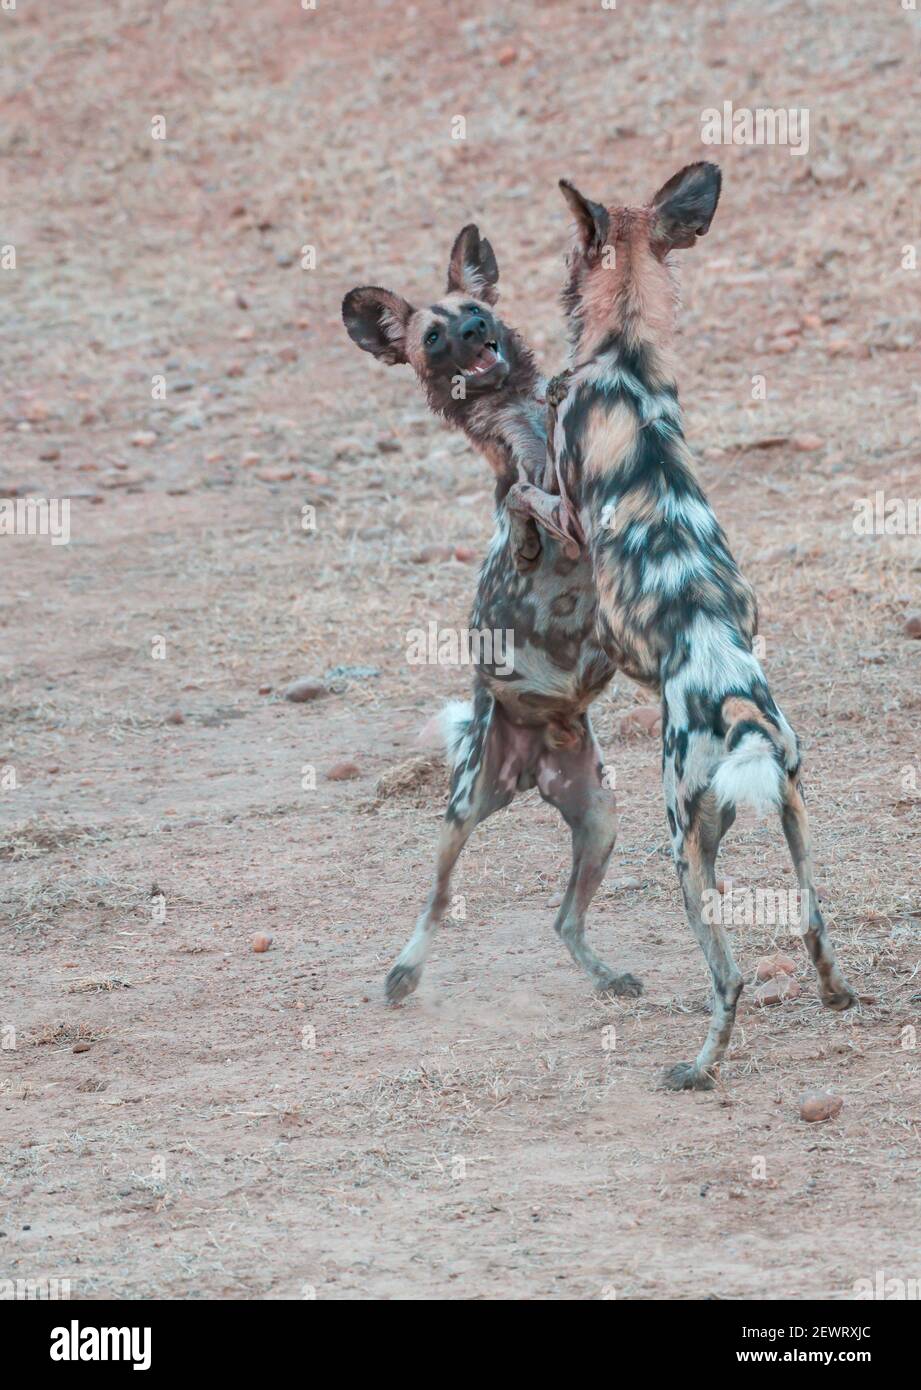 African wild dogs (Lycaon pictus), standing and playing, South Luangwa National Park, Zambia, Africa Stock Photo